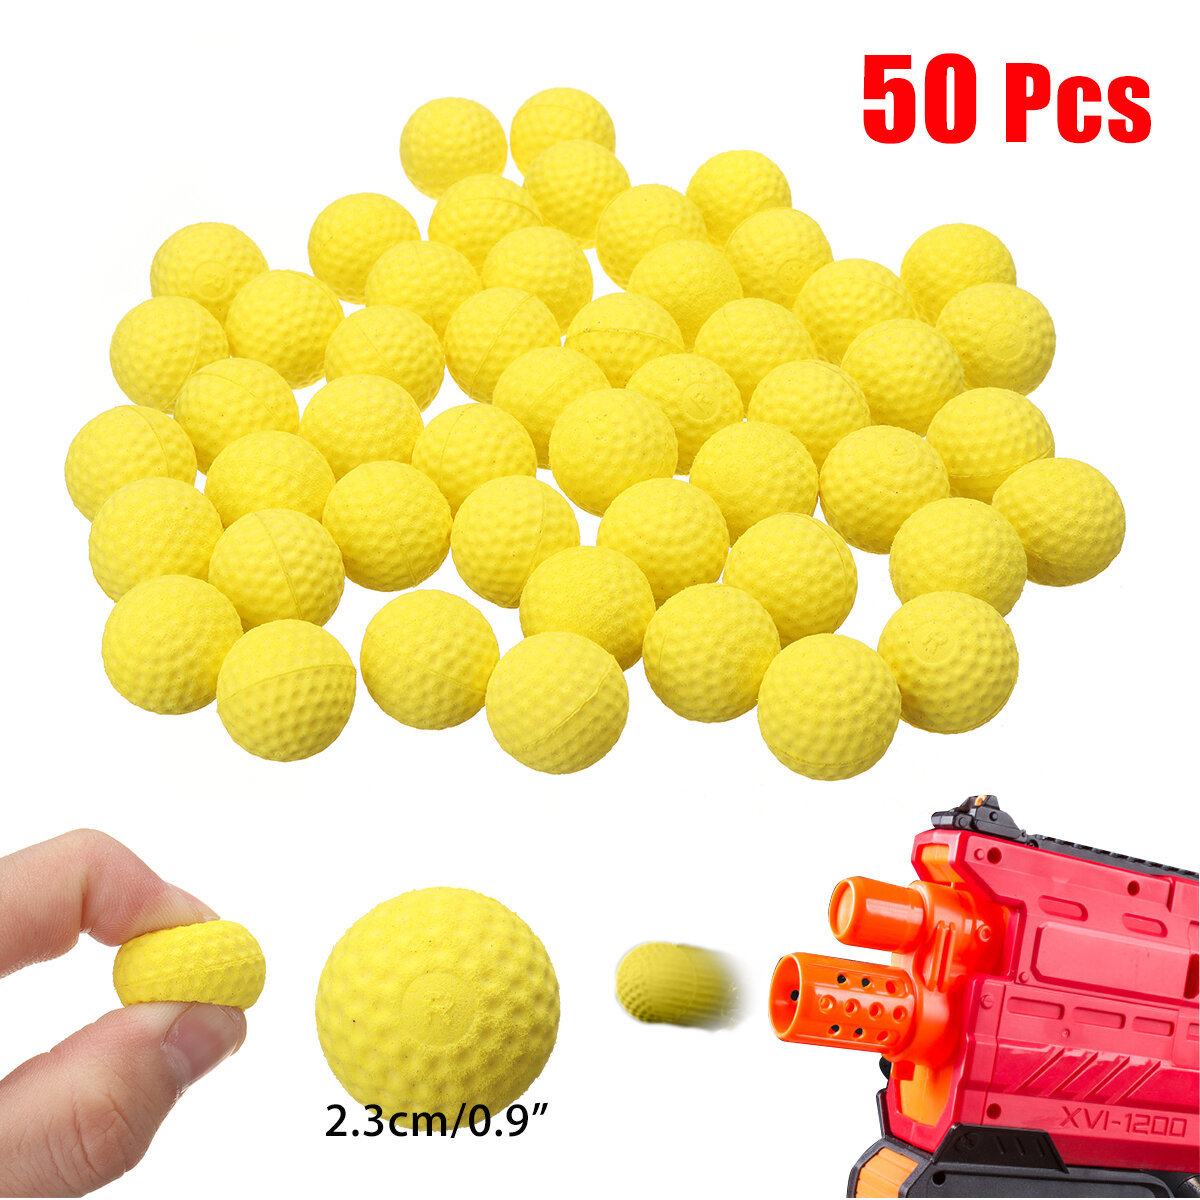 

50Pcs 2.3cm PU Buoyancy Rounds Bullet Balls Kids Toy Ball for Hunting Garden